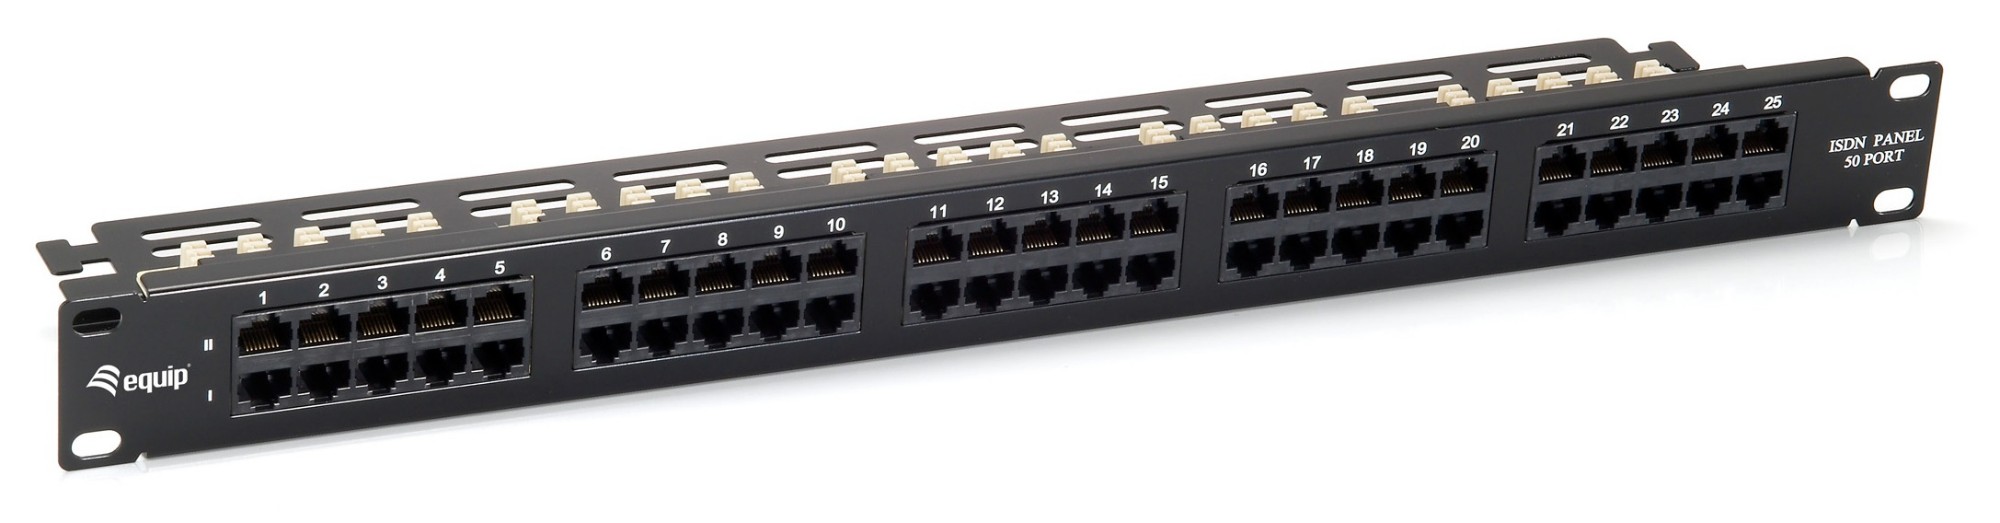 Photos - Other network equipment Equip 50-Port Cat.3 RJ45 ISDN Patch Panel, Black 125295 